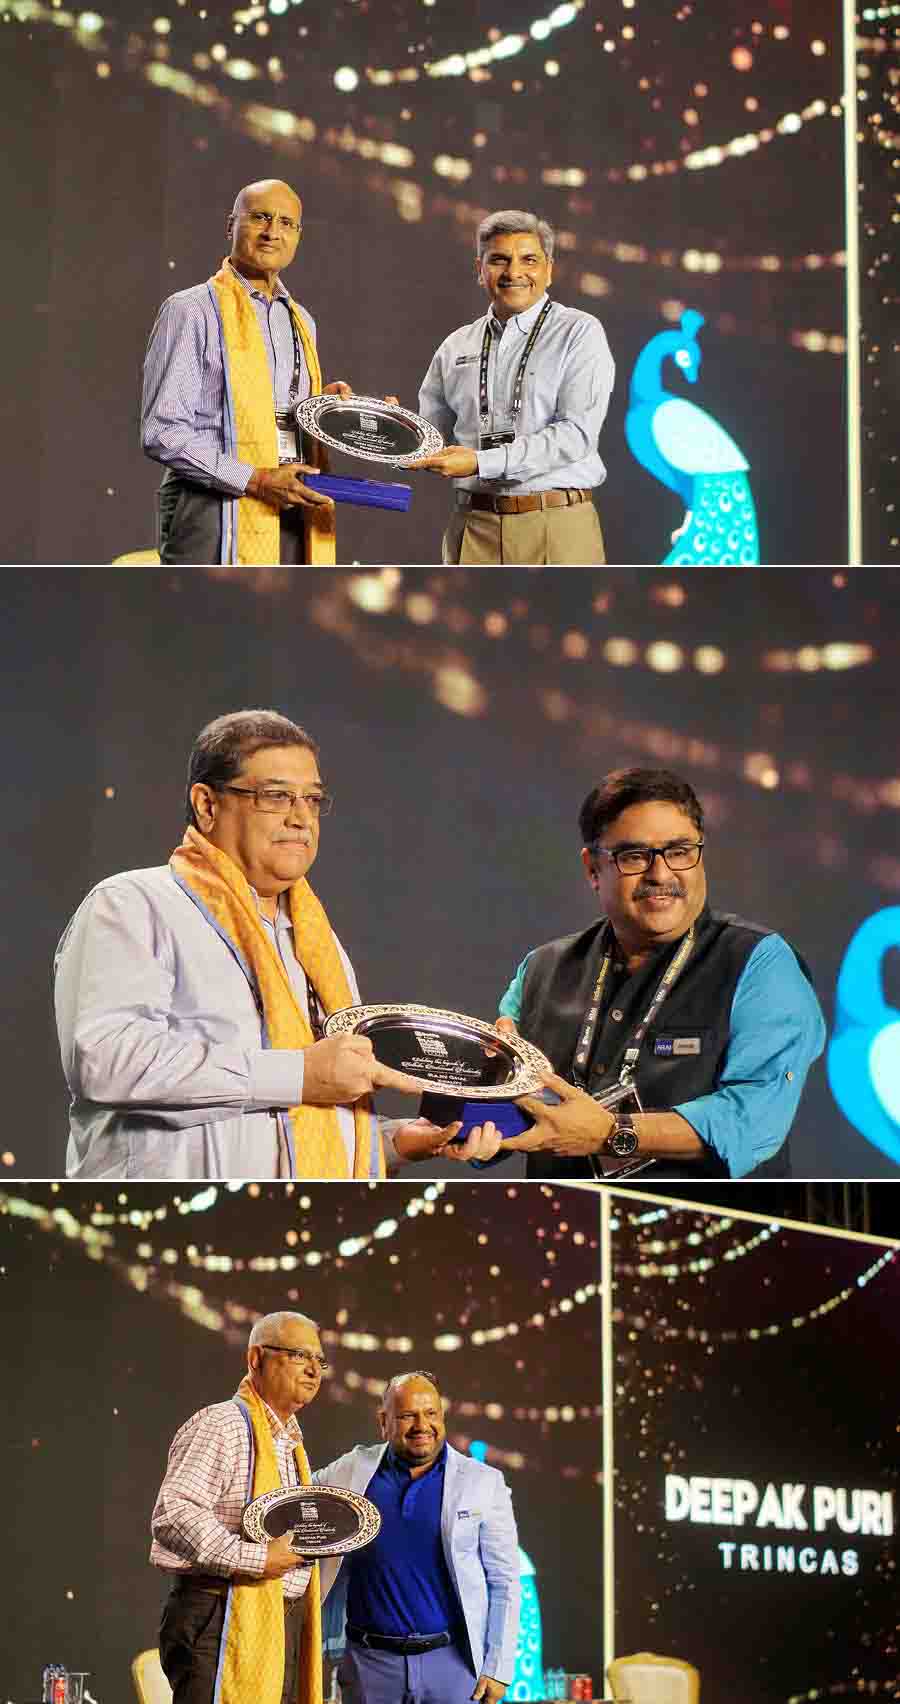 (Top) Nitin Kothari, second-generation owner, Peter Cat and Mocambo, was felicitated by Aseem Grover, founder, Big Chill Cafe, Delhi; (centre) Rajiv Ghai, owner, Kwality Restaurant was felicitated by Anurag Katriar, founder and MD of Indigo Hospitality and (bottom) Deepak Puri, second-generation owner, Trincas, was felicitated by Rahul Singh, founder & CEO, The Beer Cafe